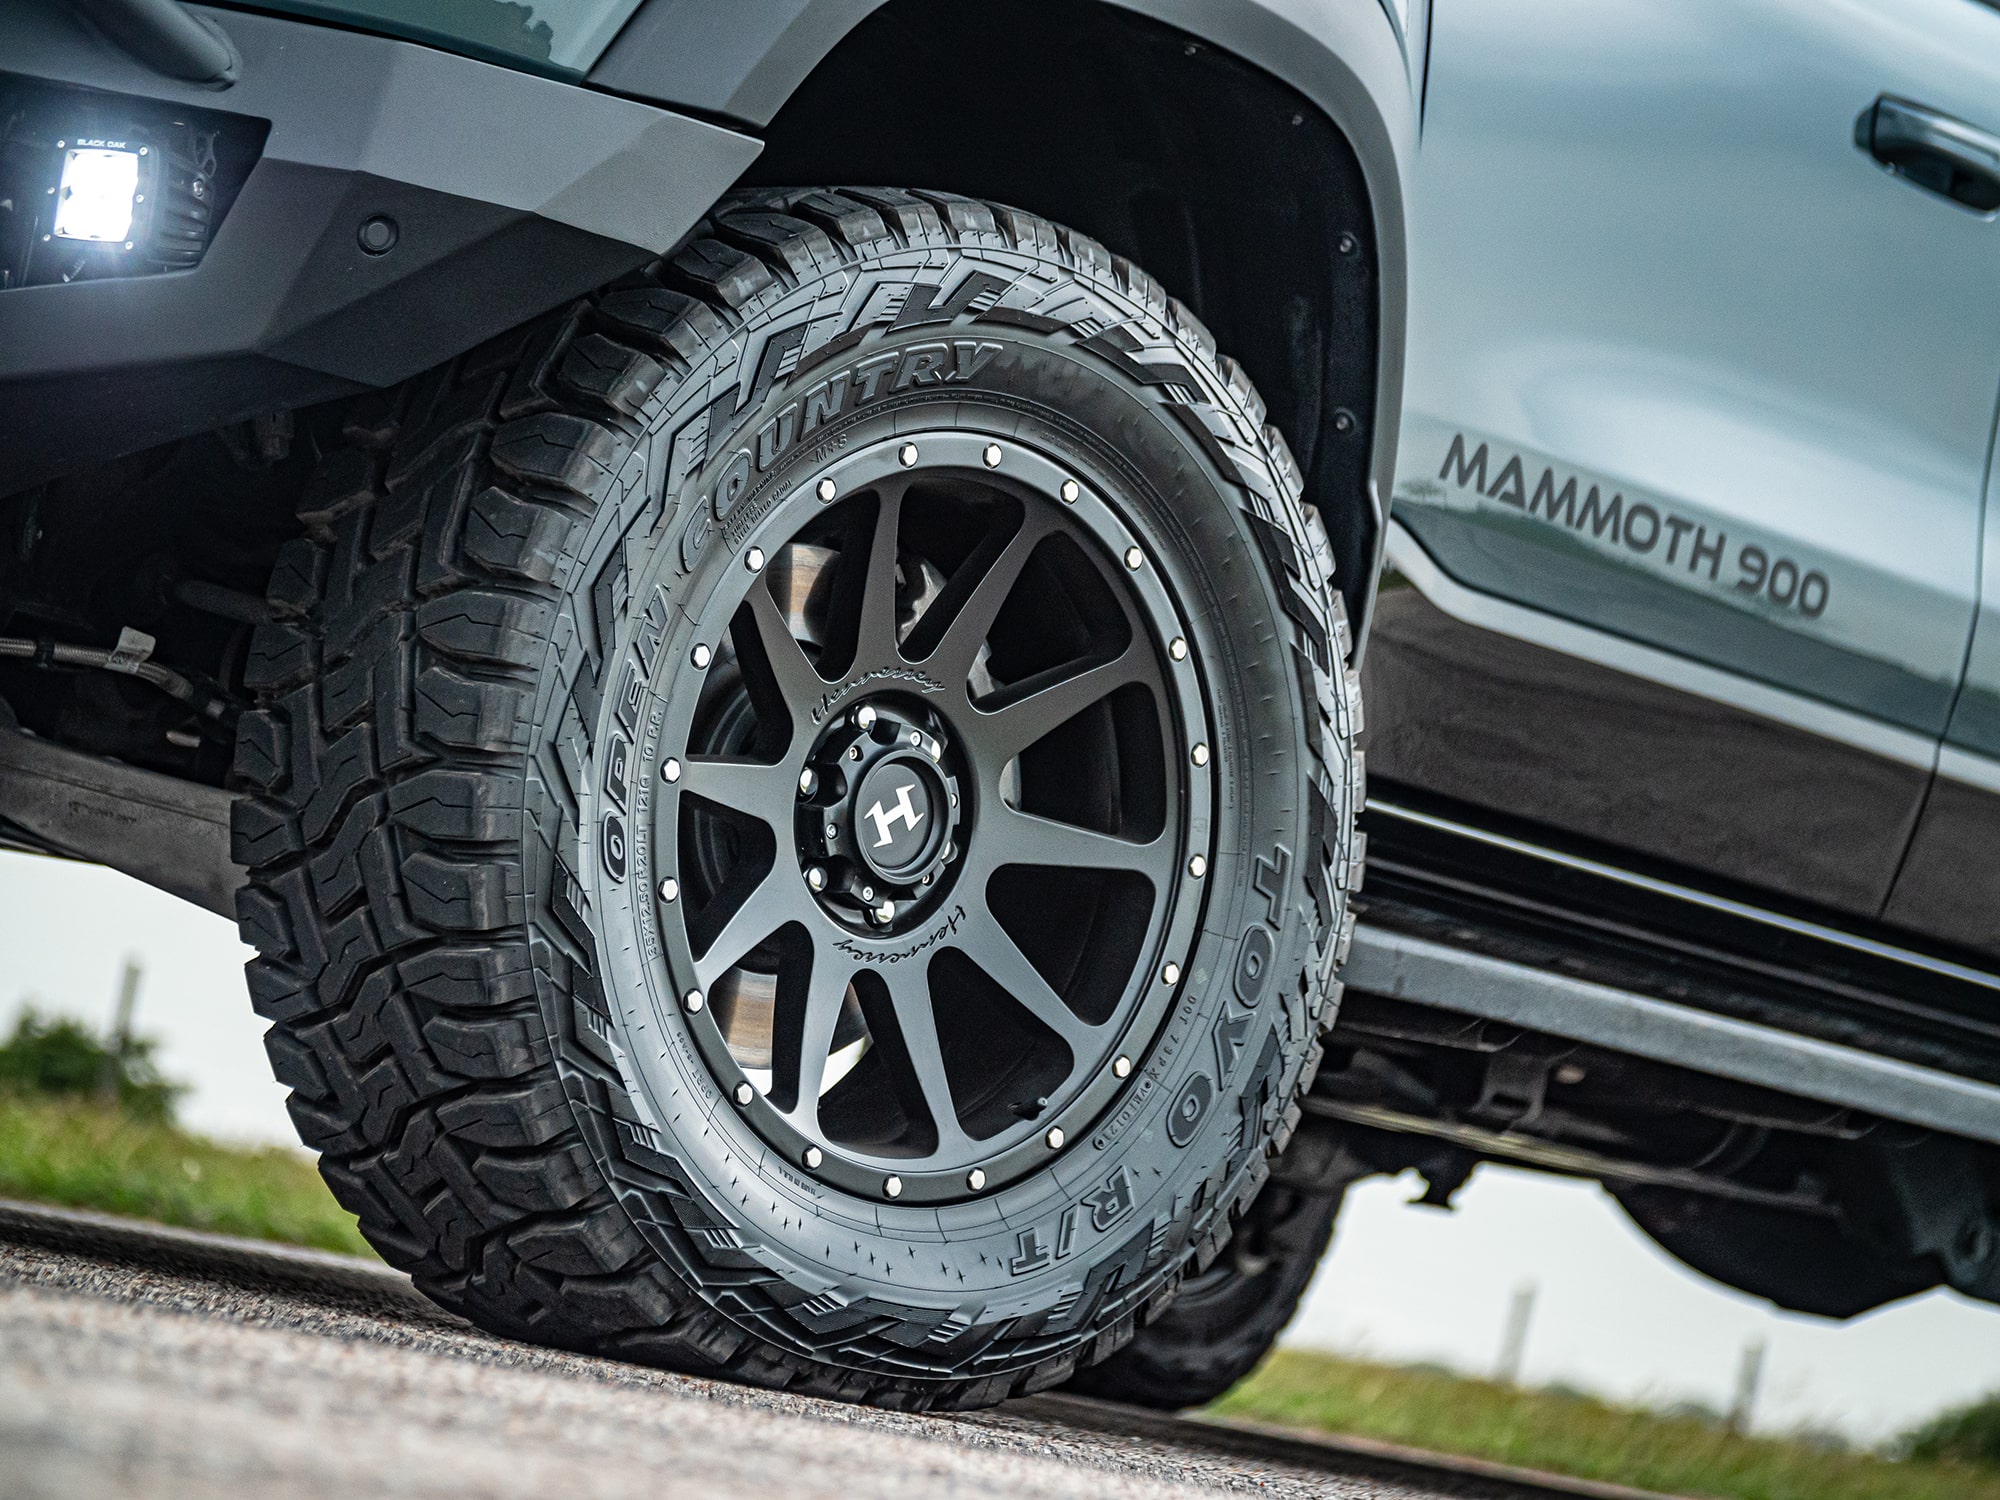 The 20-inch Hennessey wheels of the MAMMOTH OFF-ROAD STAGE 1. Source: http://hennesseyperformance.com/vehicles/dodge/ram-1500-trx/